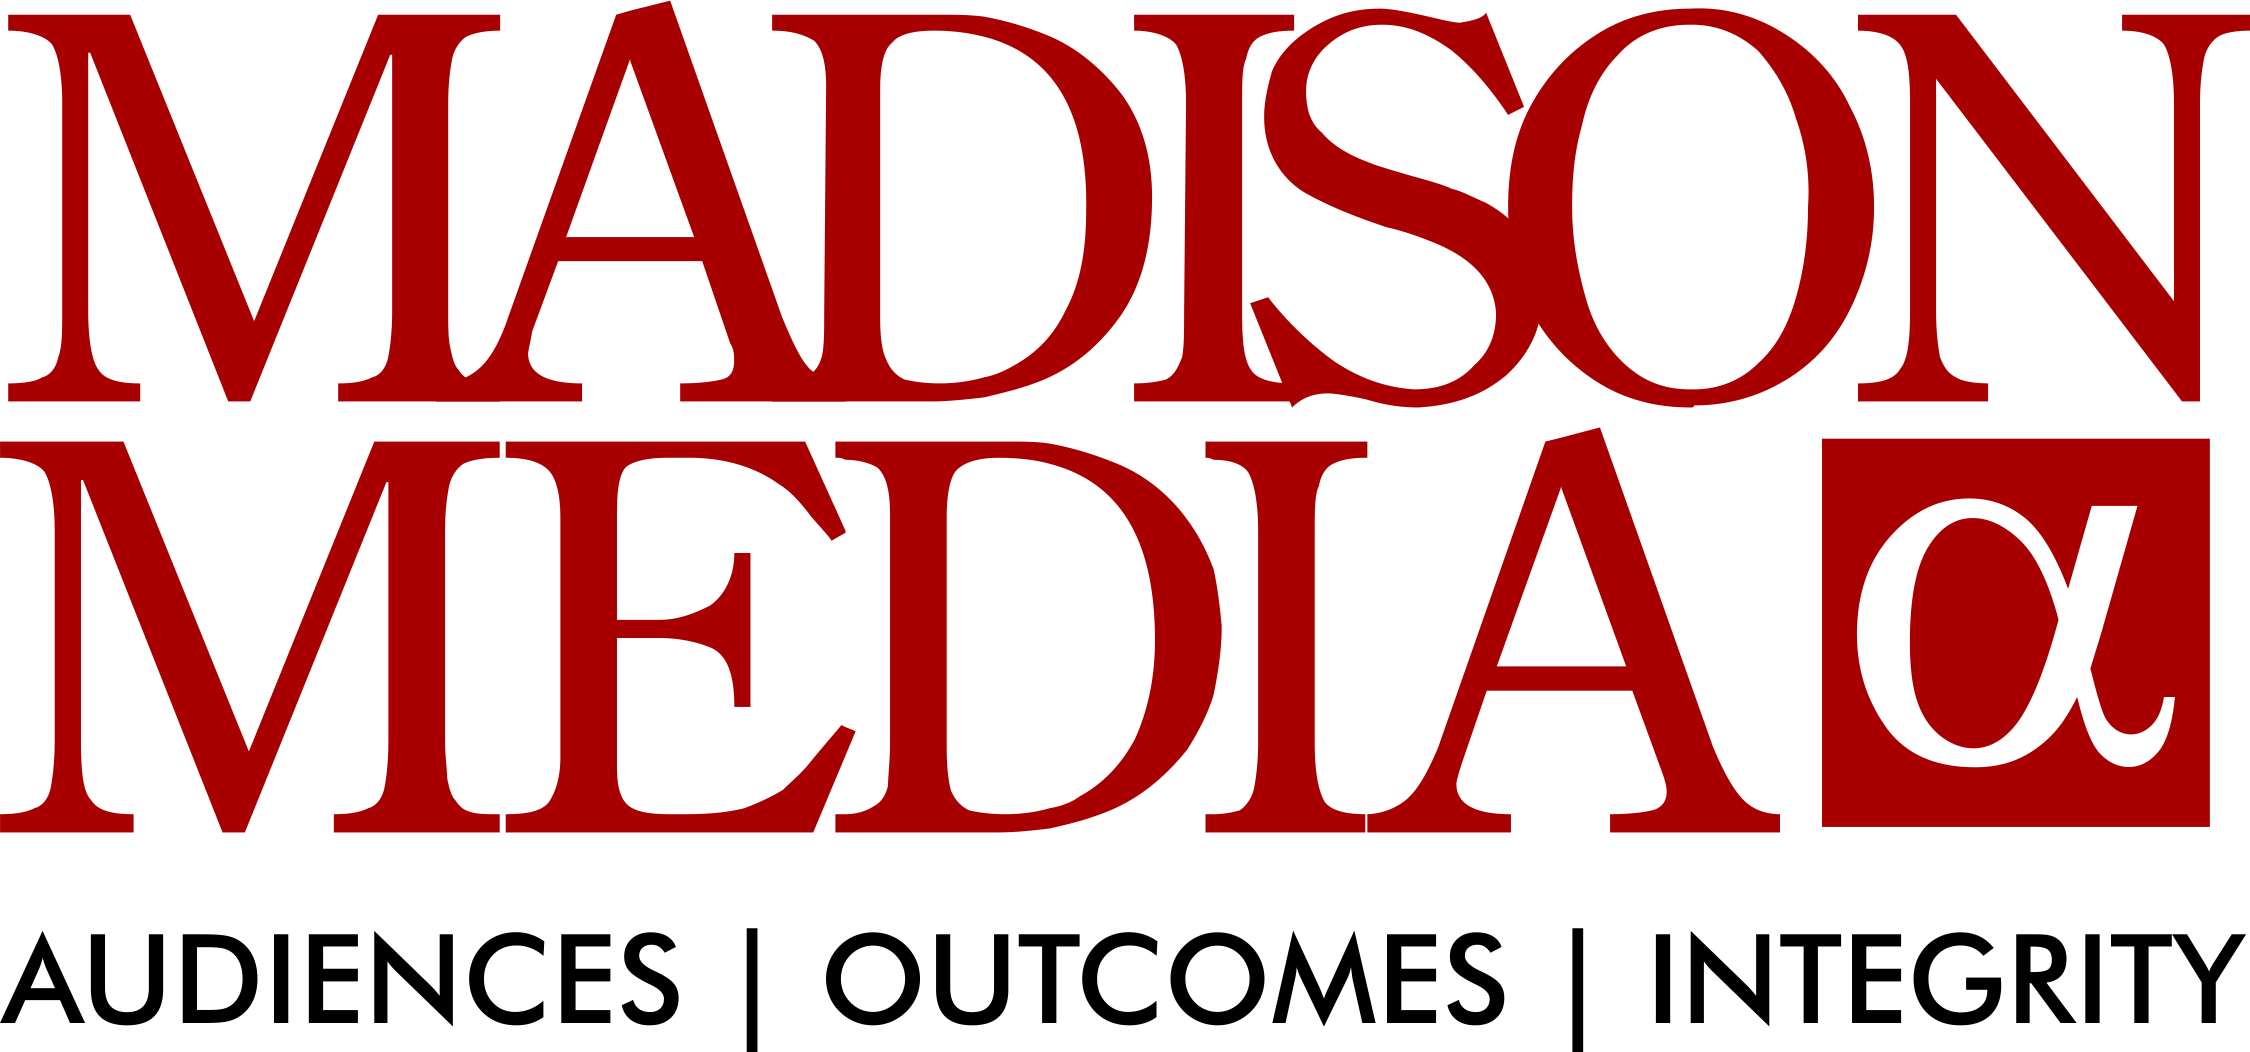 Uncle Delivery announces Madison Media Alpha as their Media Agency on Record